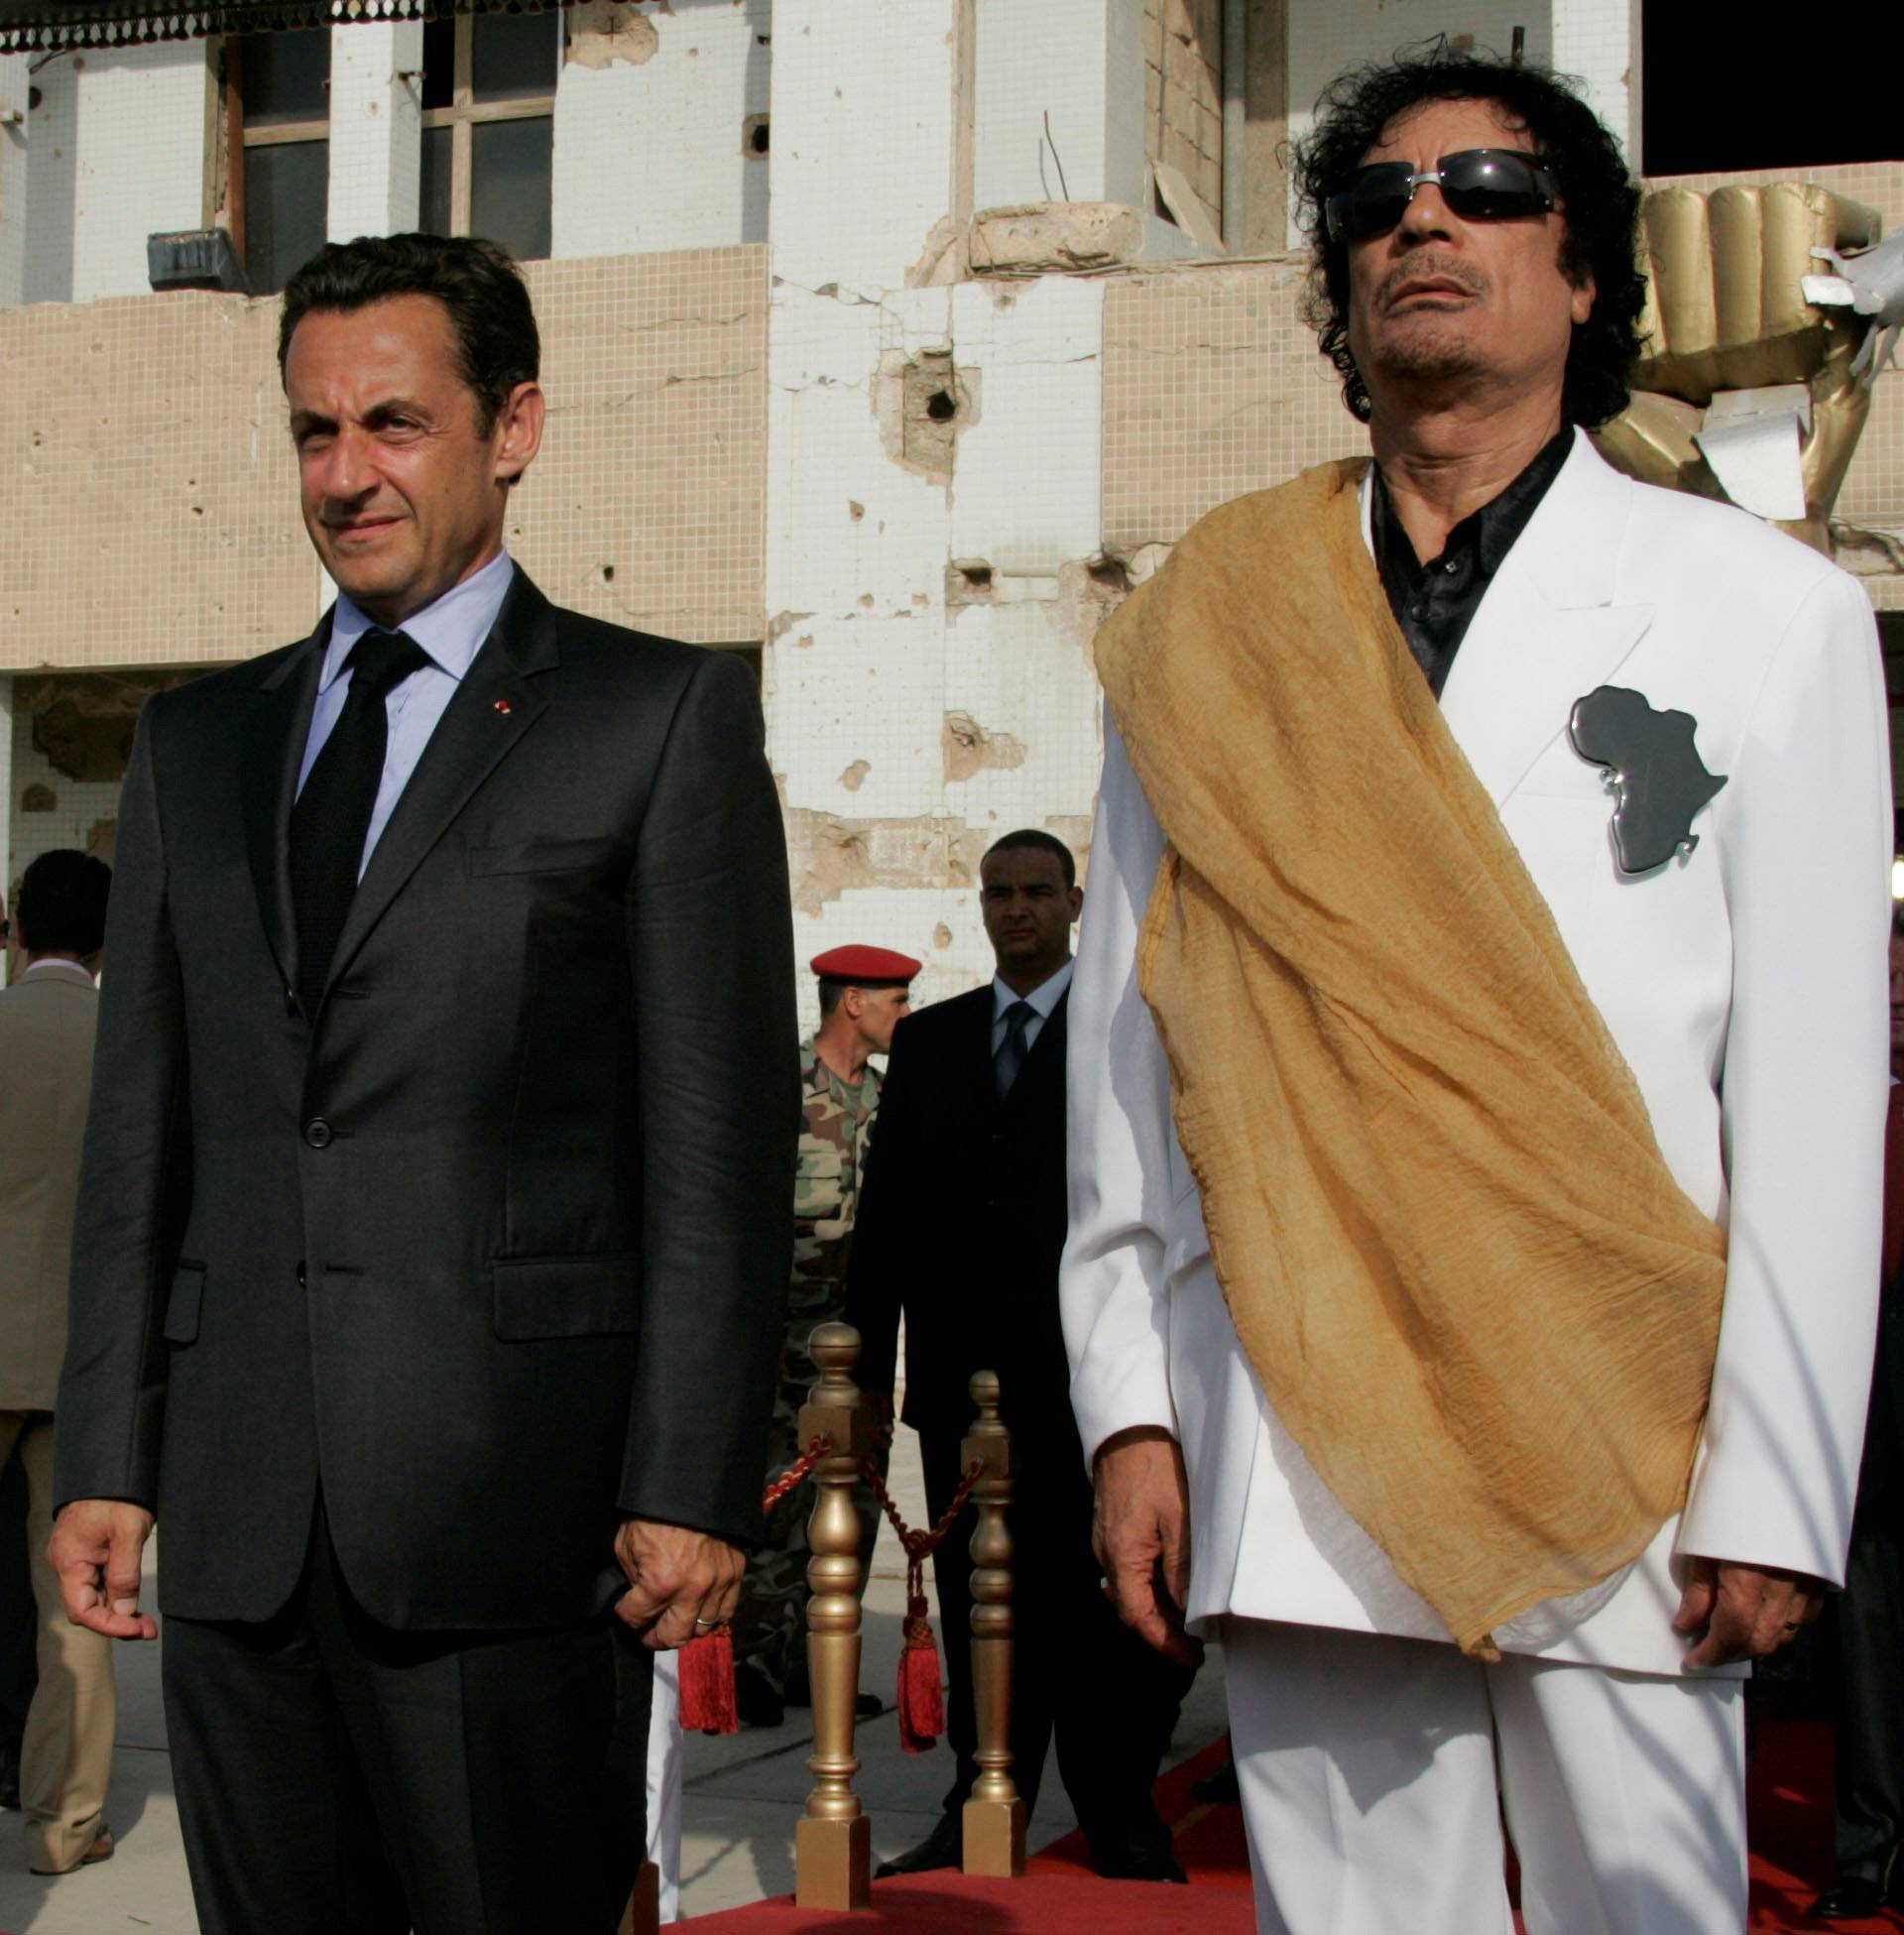 FILE PHOTO: Libya's President  Gaddafi and his counterpart from France Sarkozy listen to national anthems at Bab Azizia Palace in Tripoli